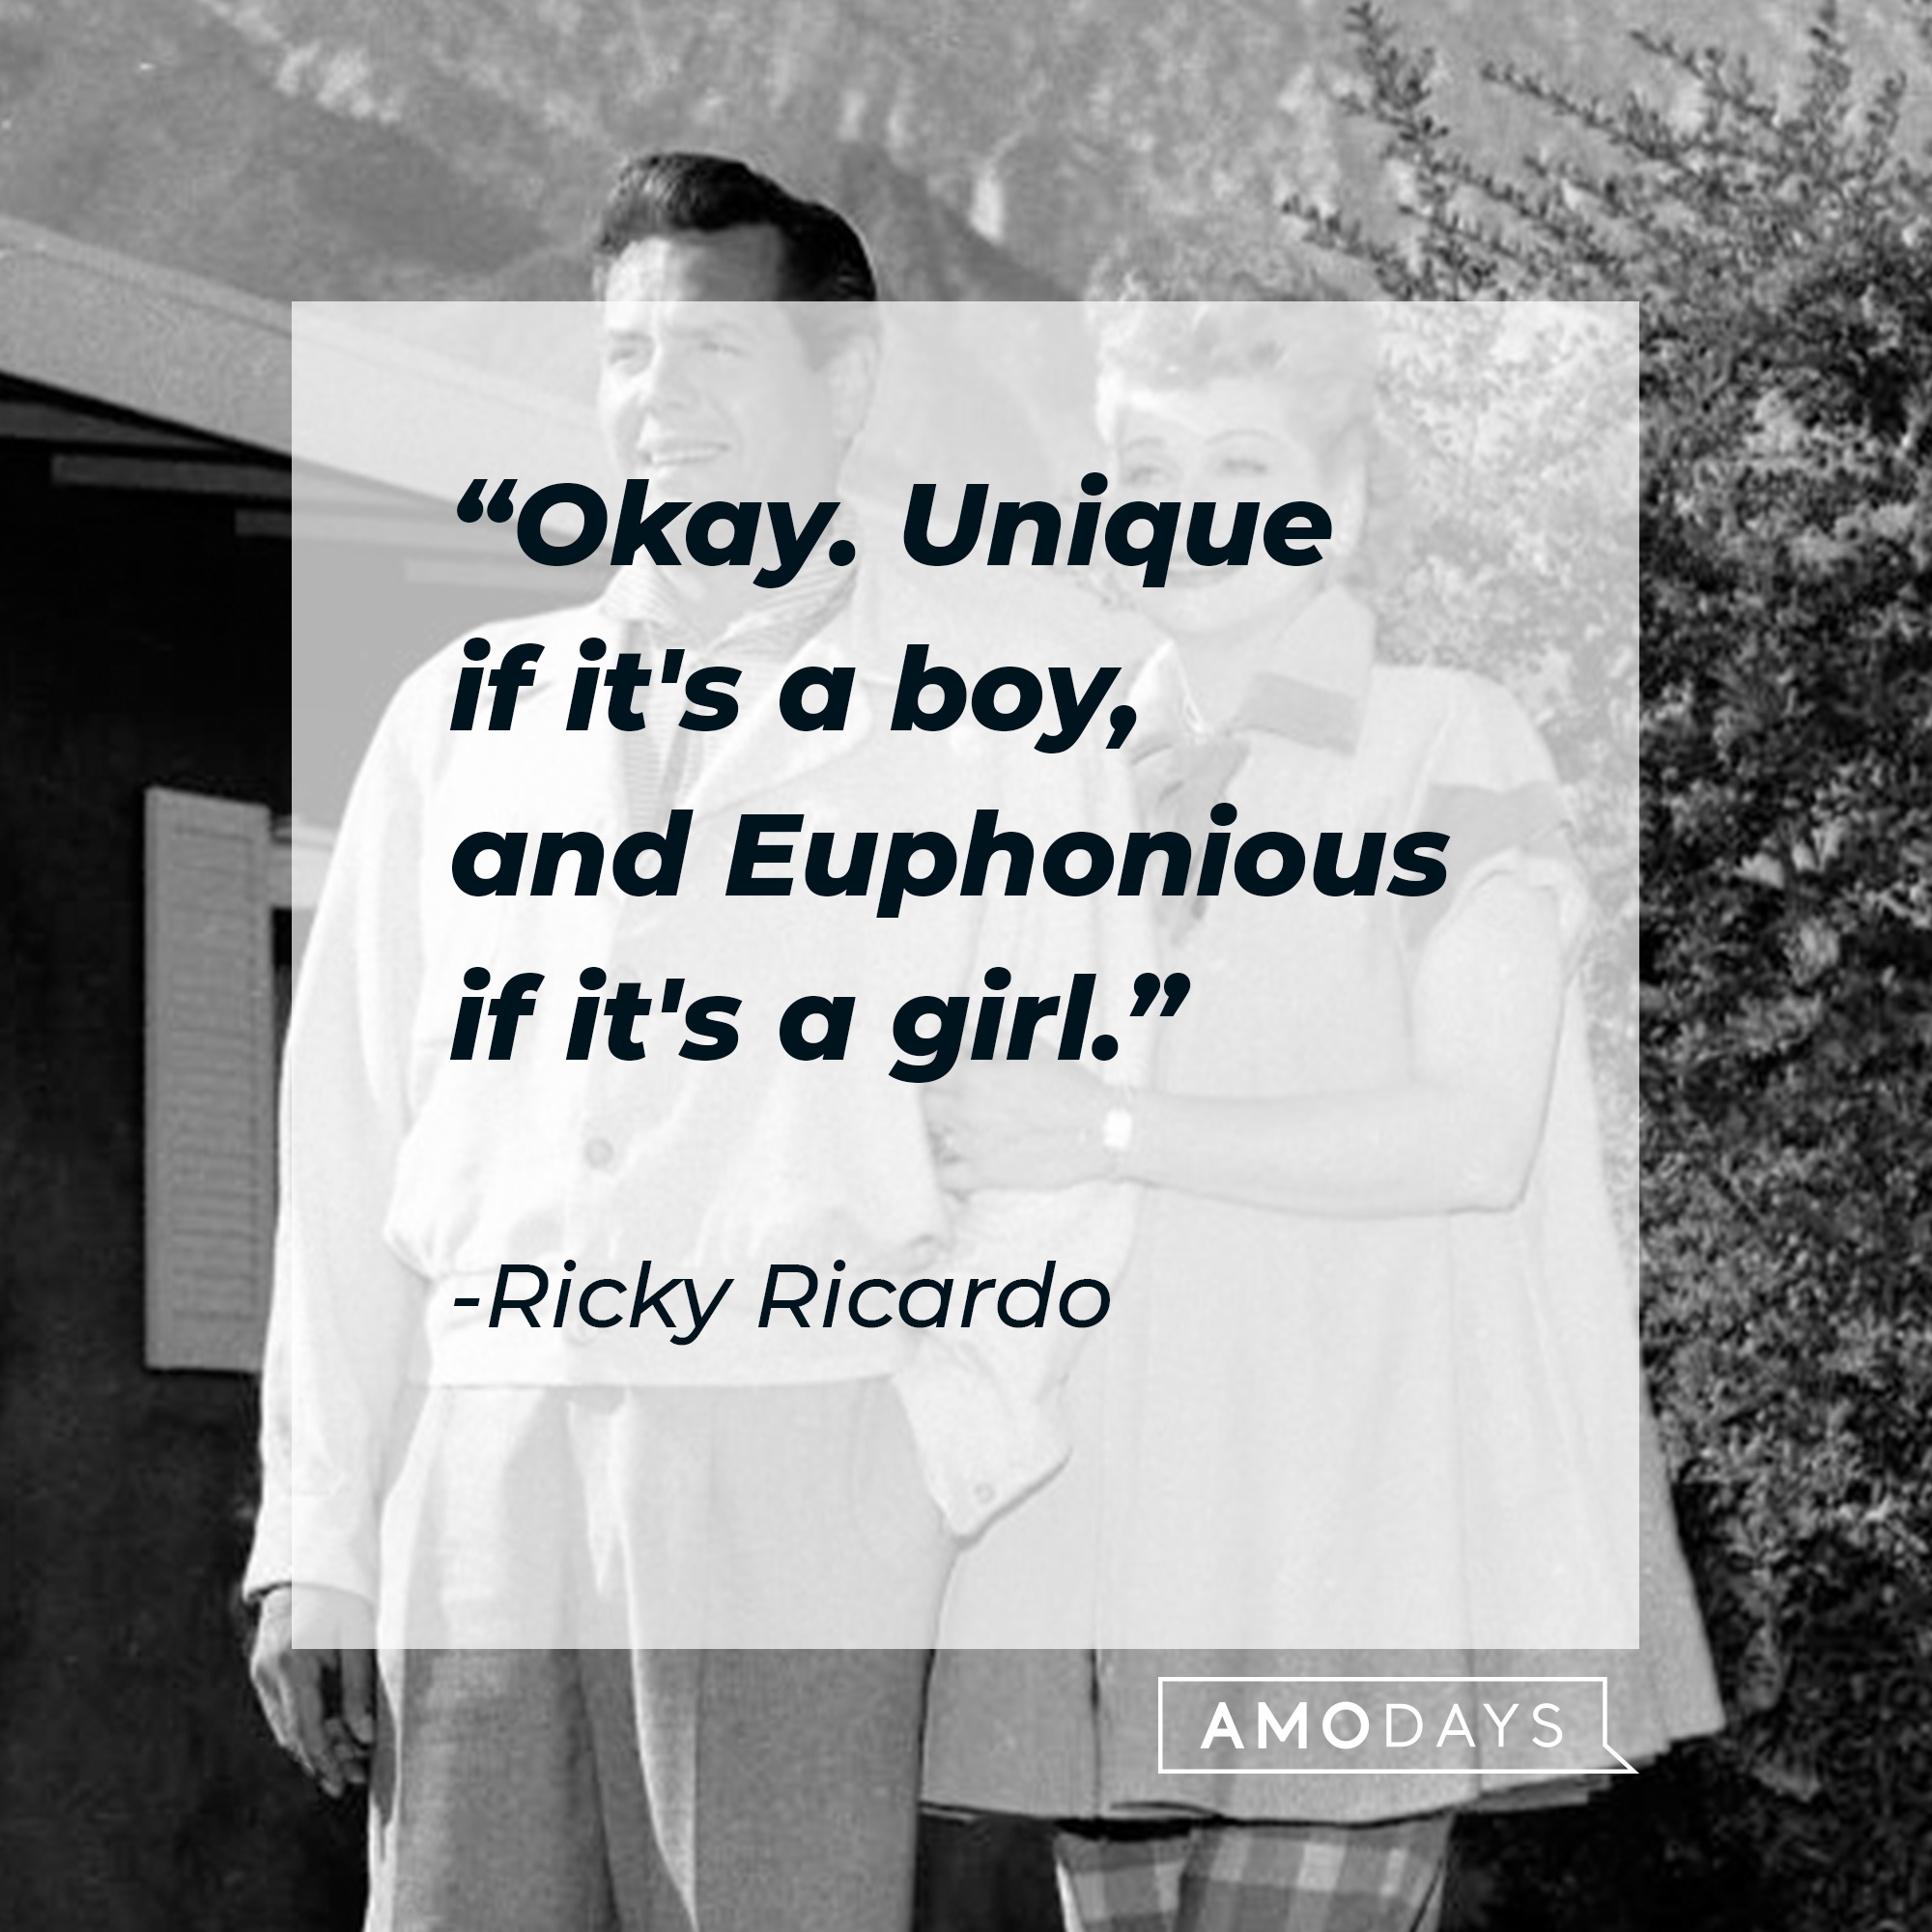 Ricky Ricardo's quote: "Okay. Unique if it's a boy, and Euphonious if it's a girl." | Source: Getty Images